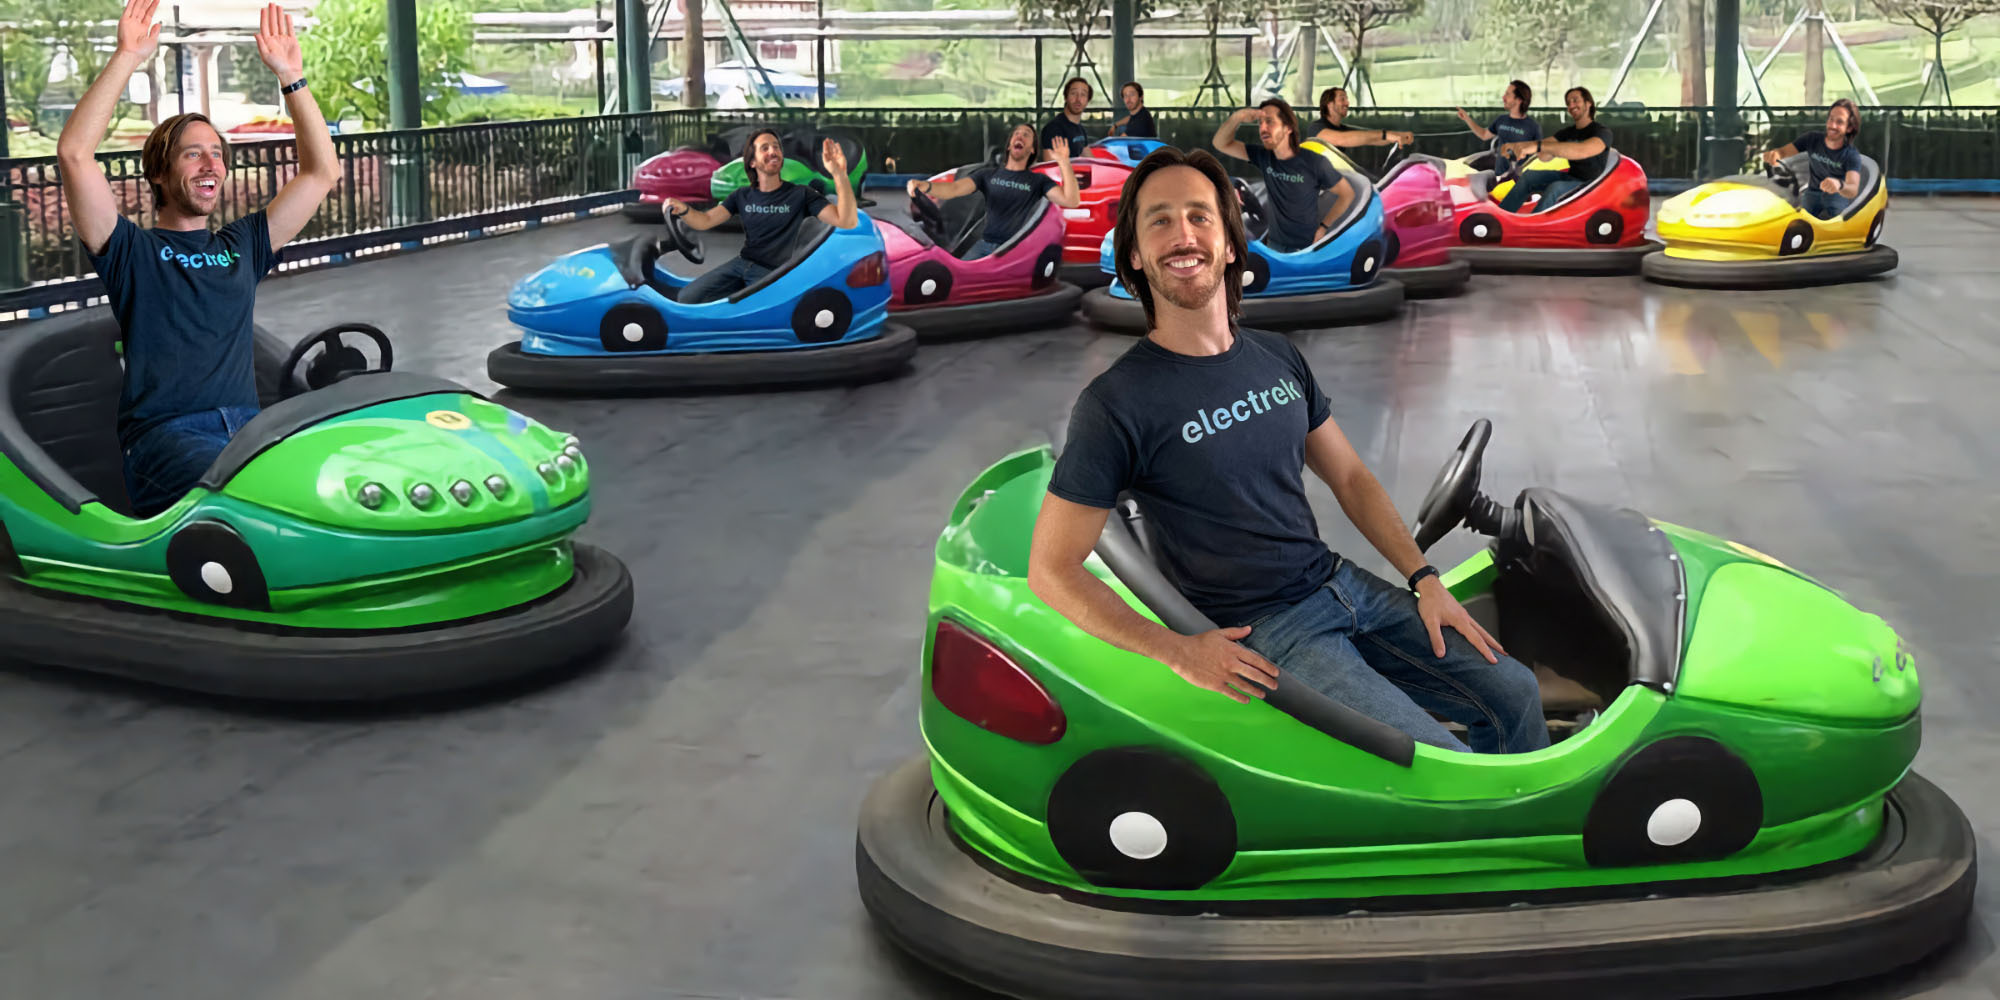 You can buy electric bumper cars from China – but you shouldn't